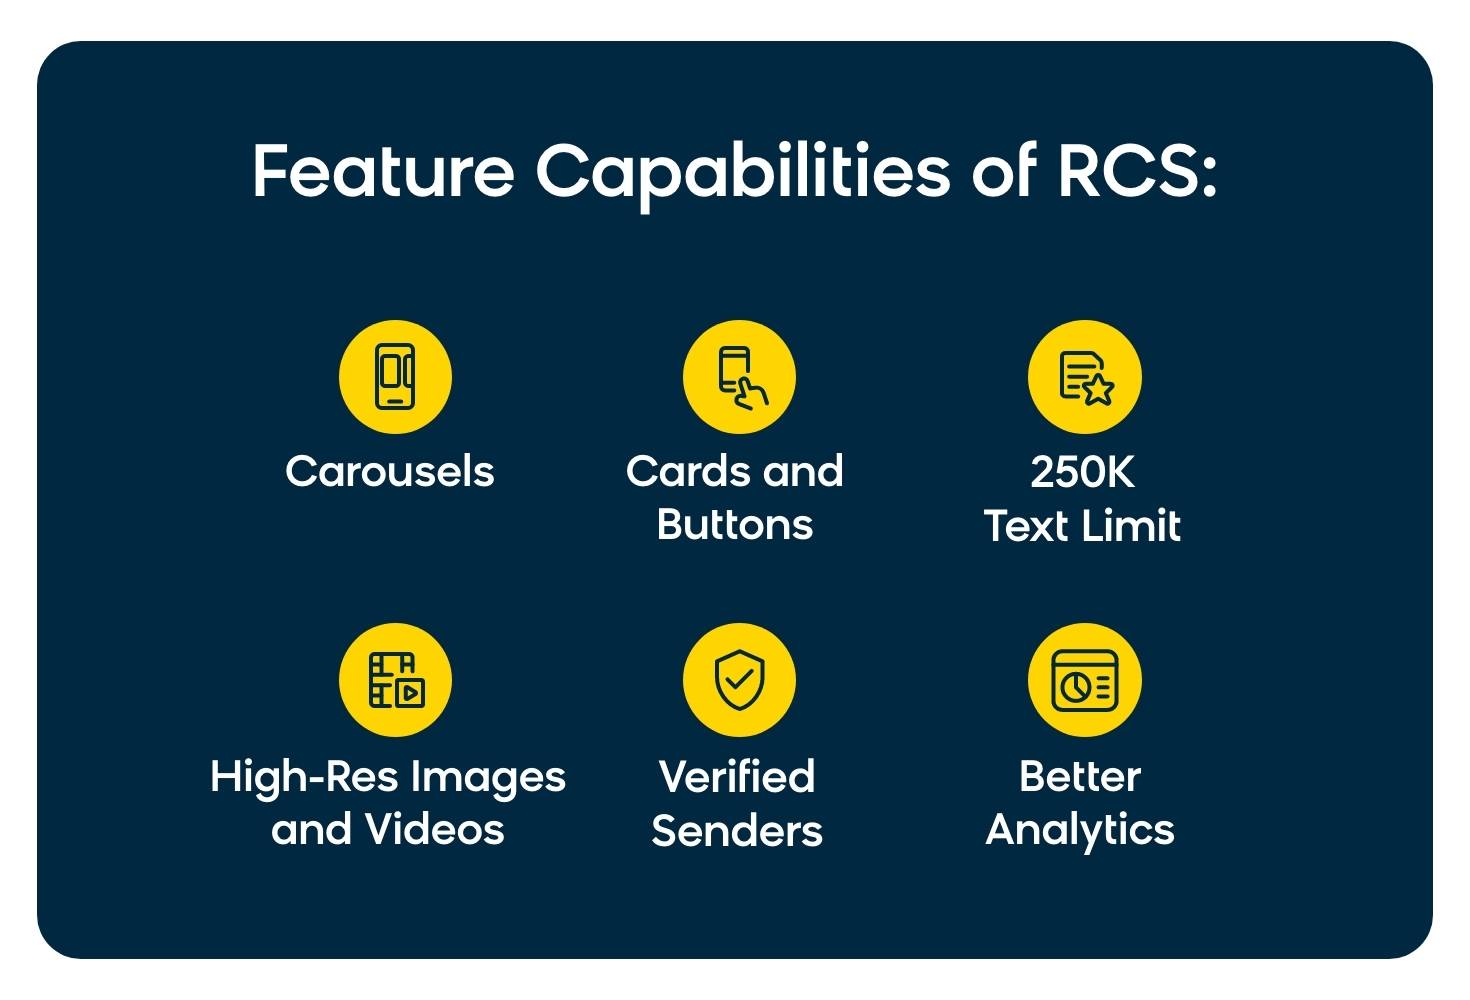 The feature capabilities of RCS